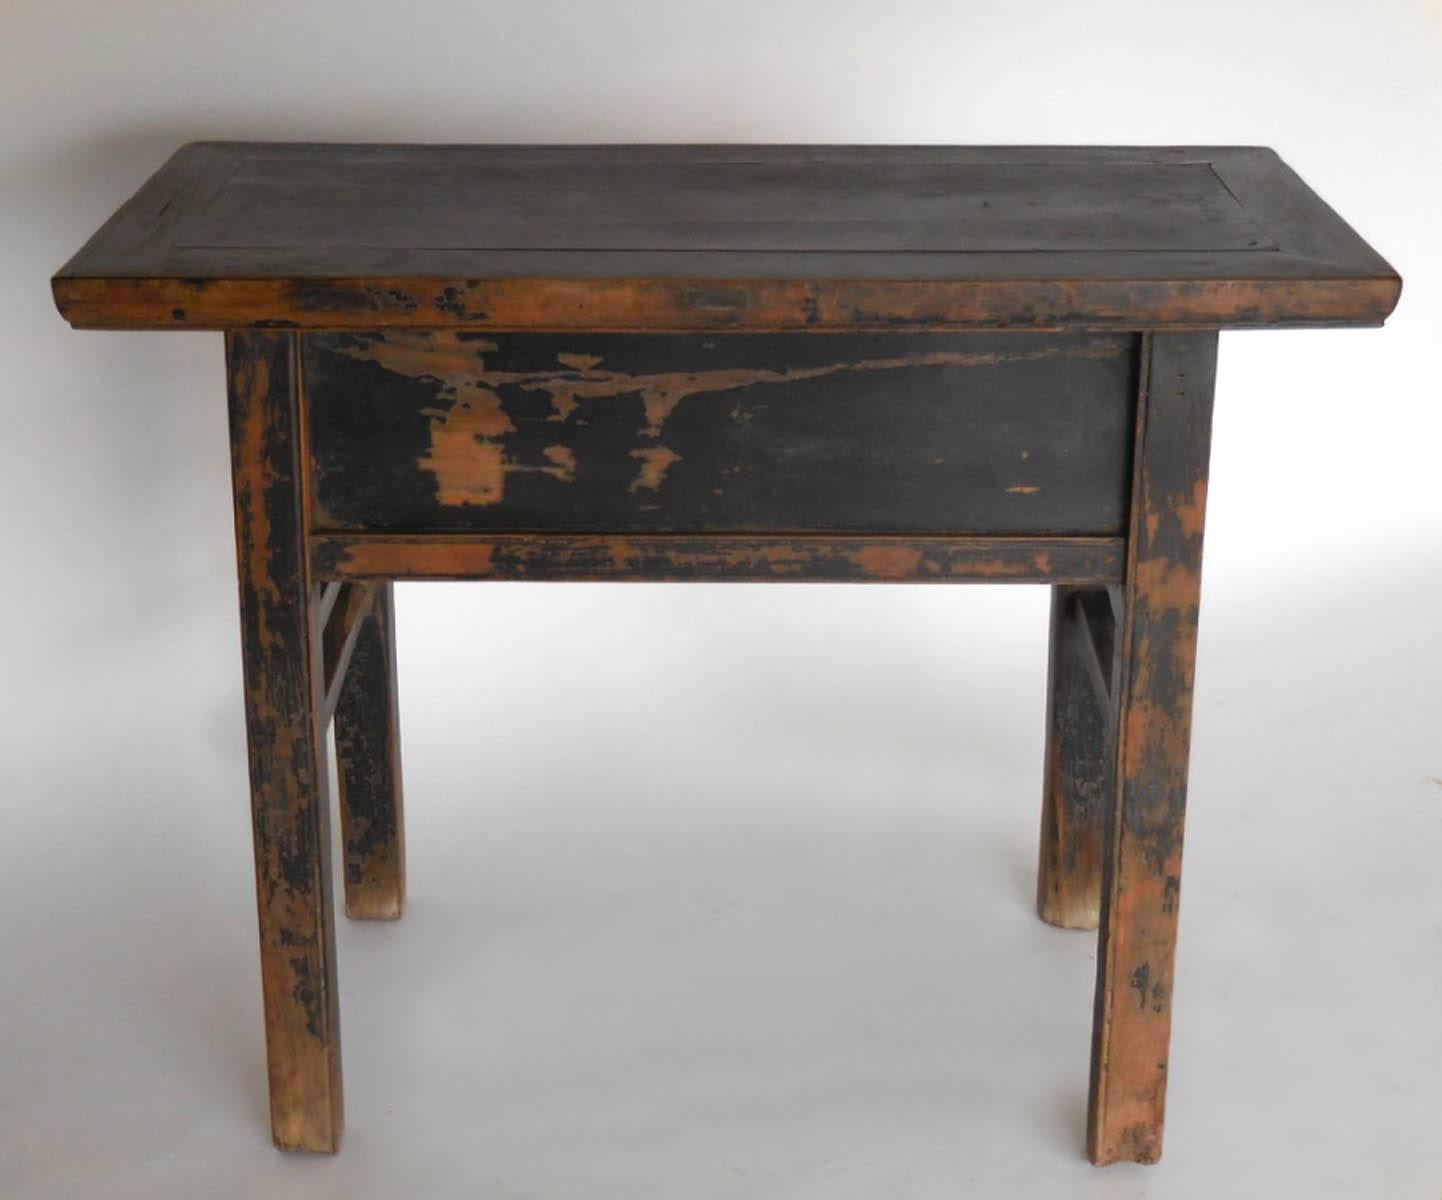 18th century painted elm console with framed top and one drawer with cut-out painted motif. Hand-hammered nails and dovetail construction. Beautiful patina throughout. Completely functional.